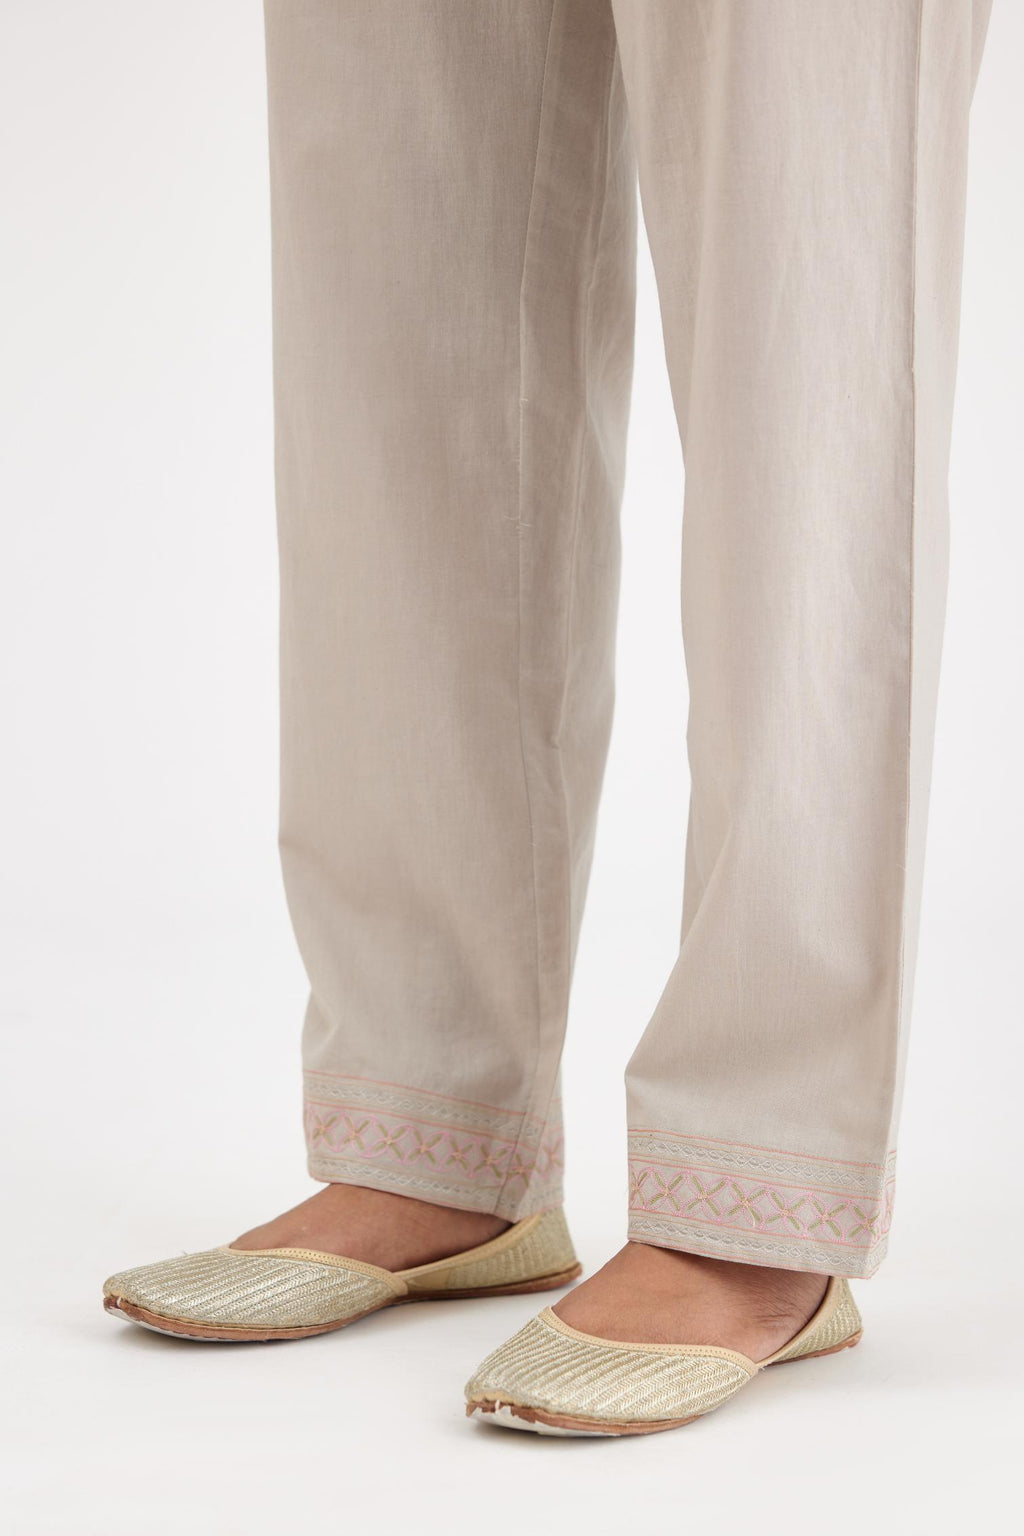 Grey cotton straight pants with multi colored thread embroidery, highlighted with silver zari embroidery at bottom hem